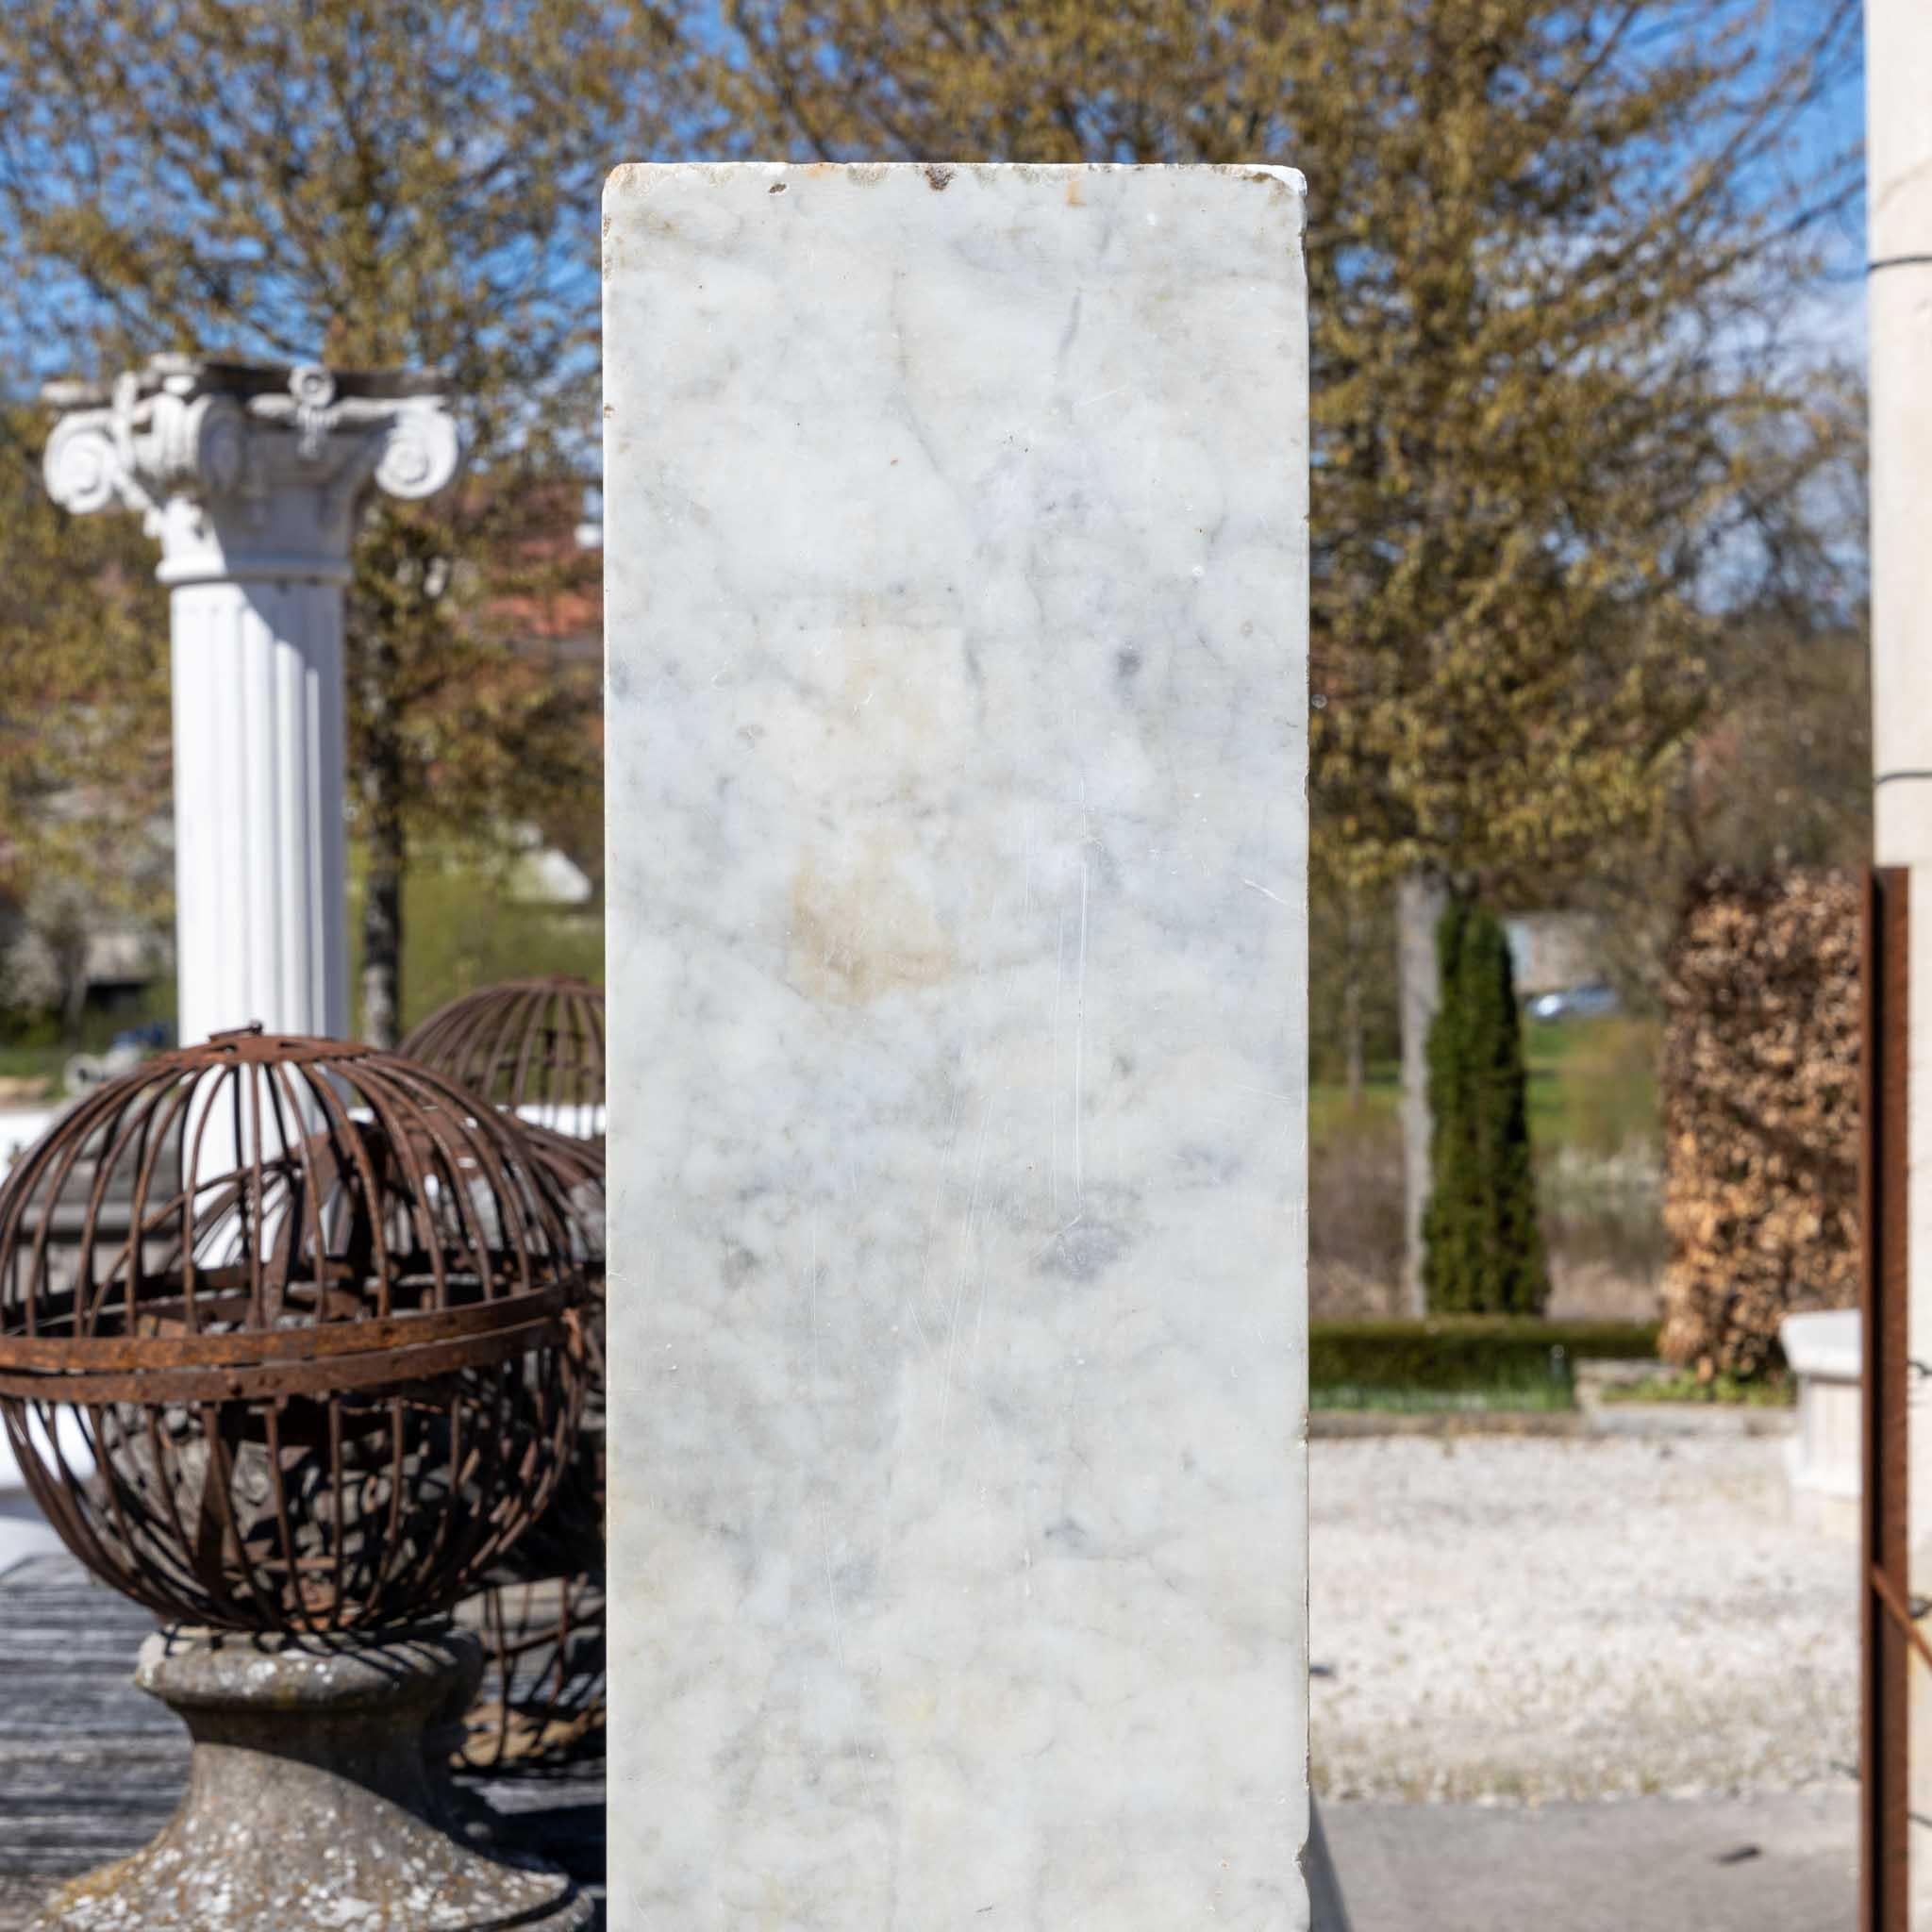 Two cubic stelae made of Carrara marble from court property.